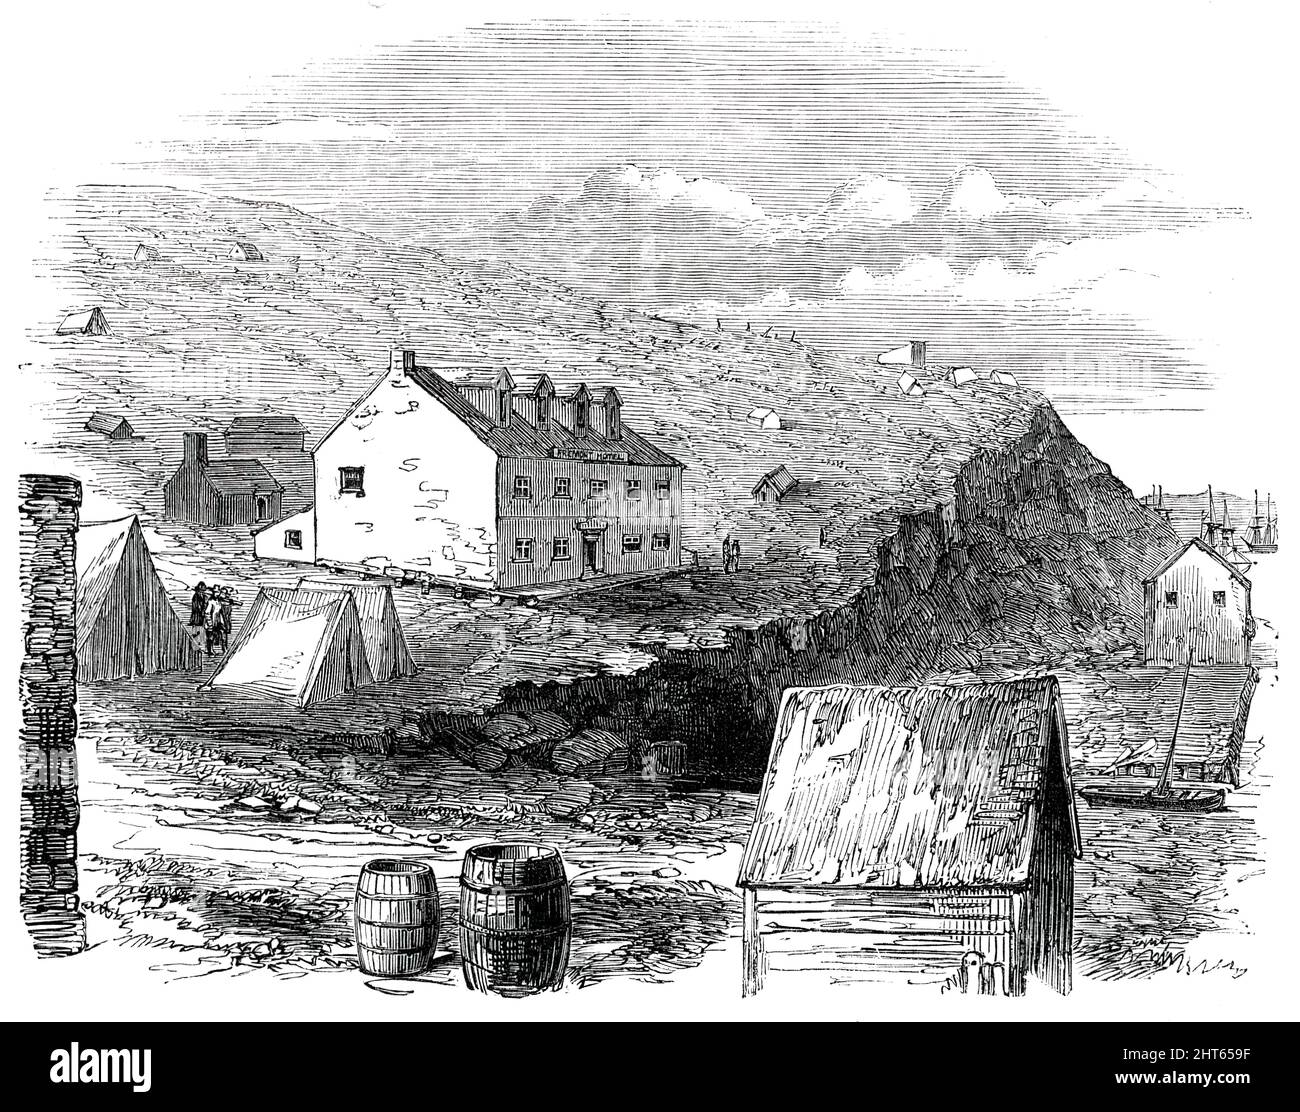 California: the Fremont Hotel, San Francisco, [USA]; from a recent sketch, 1850. The 1849 Gold Rush brought a flood of treasure-seekers to California. 'The Fremont Hotel, shown in the foreground...is the first house one sees as you are going round the Point...The barren side of the hill before us was covered with tents and canvas houses, and nearly in front a large two-story building displayed the sign, &quot;Fremont Family Hotel&quot;...Crossing the shoulder of the hill, the view extended around the curve of the bay, and hundreds of tents and houses appeared, scattered all over the heights, a Stock Photo